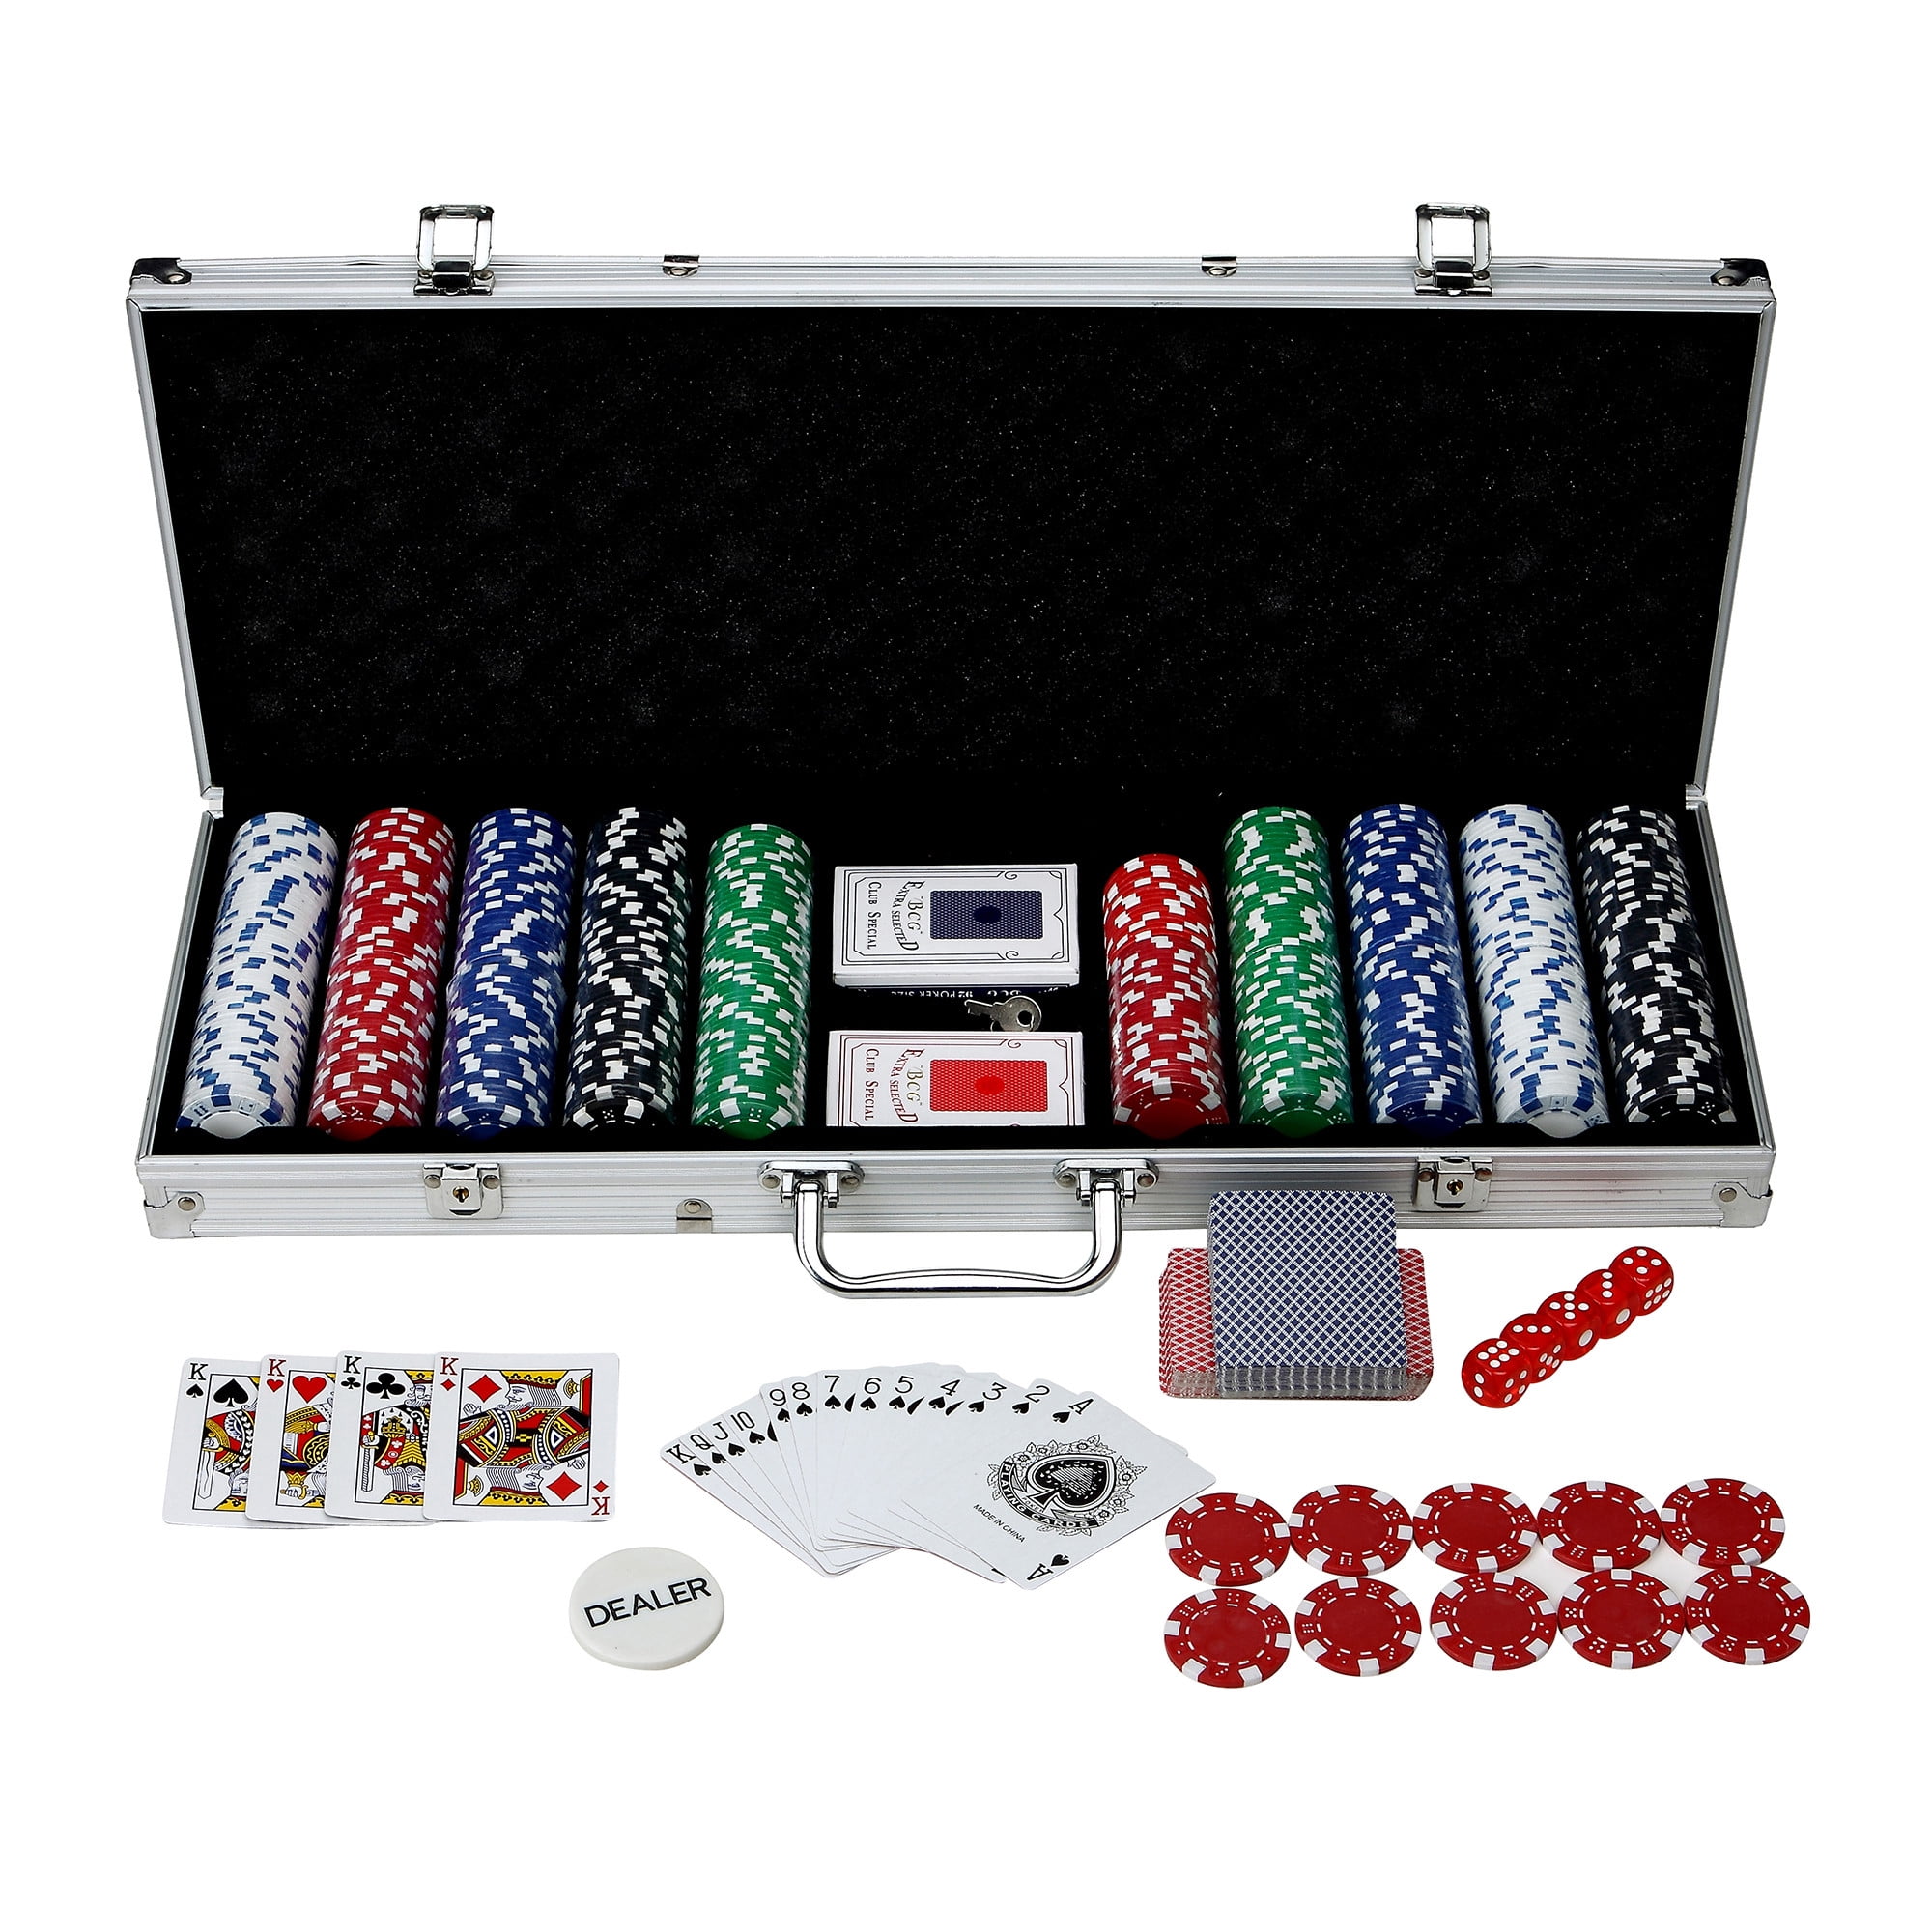 Pick Chips! New 500 Monaco Club 13.5g Clay Poker Chips Set with Aluminum Case 